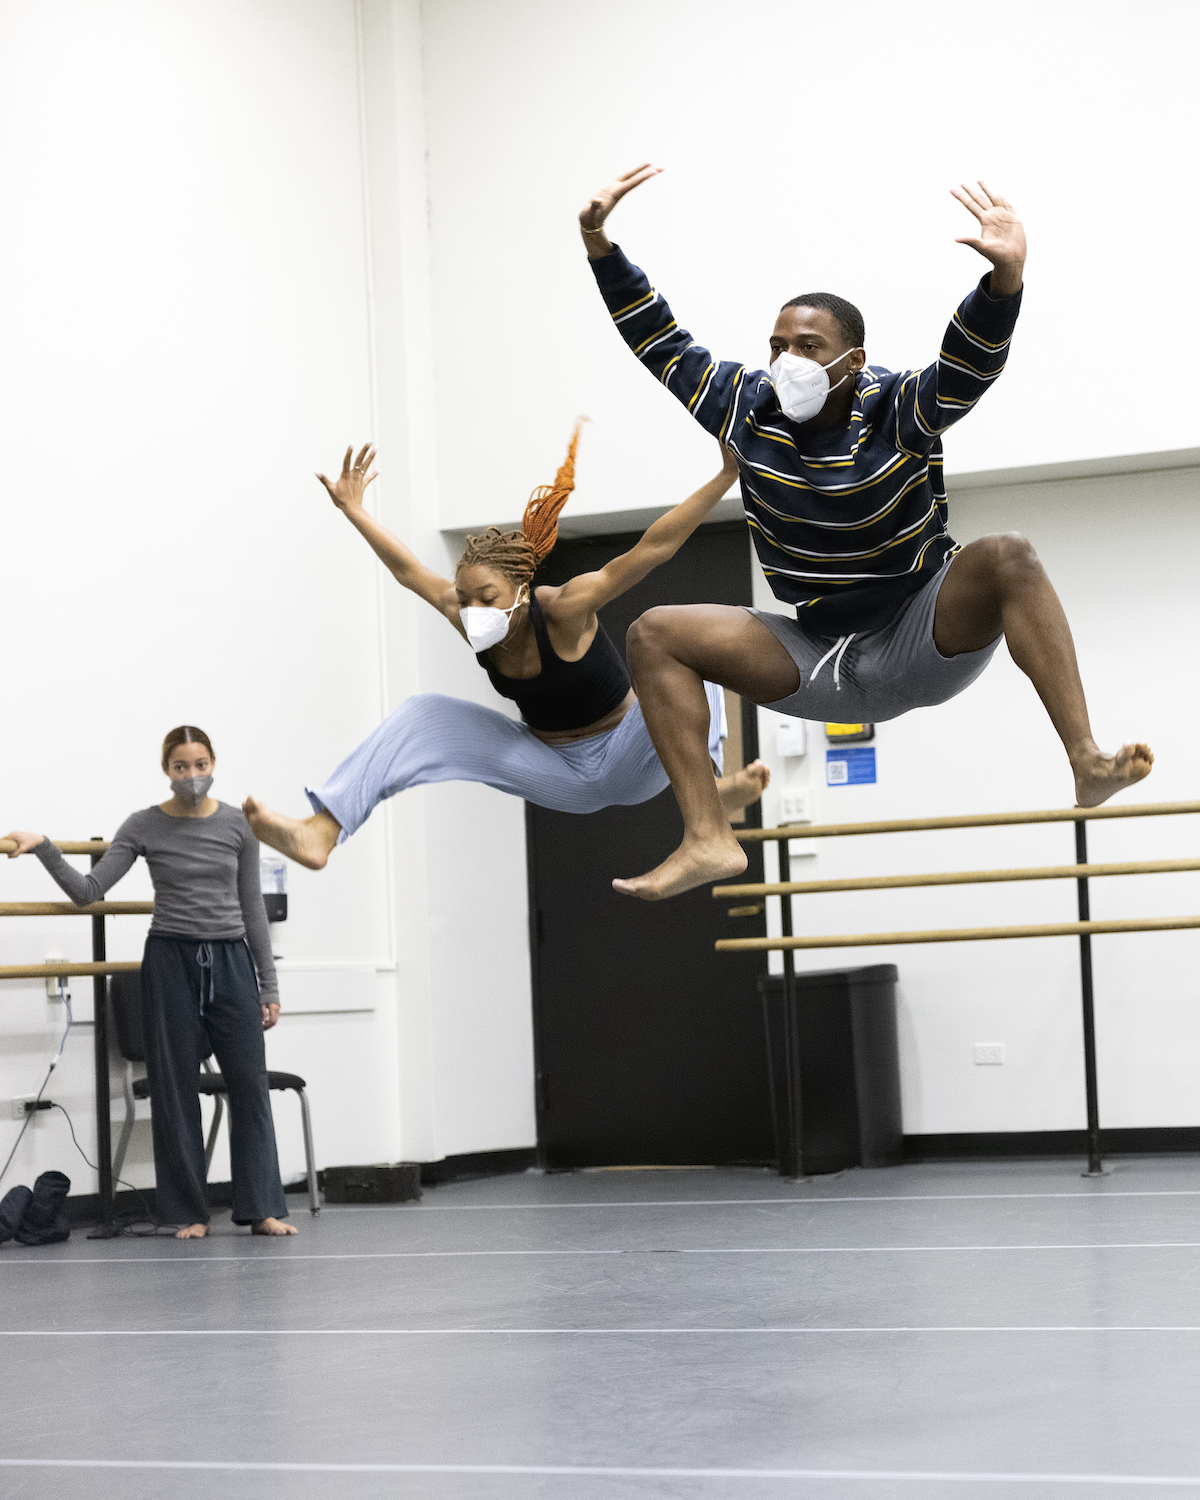 Two dancers are in mid-air while a third dancer looks on during rehearsal in a dance studio